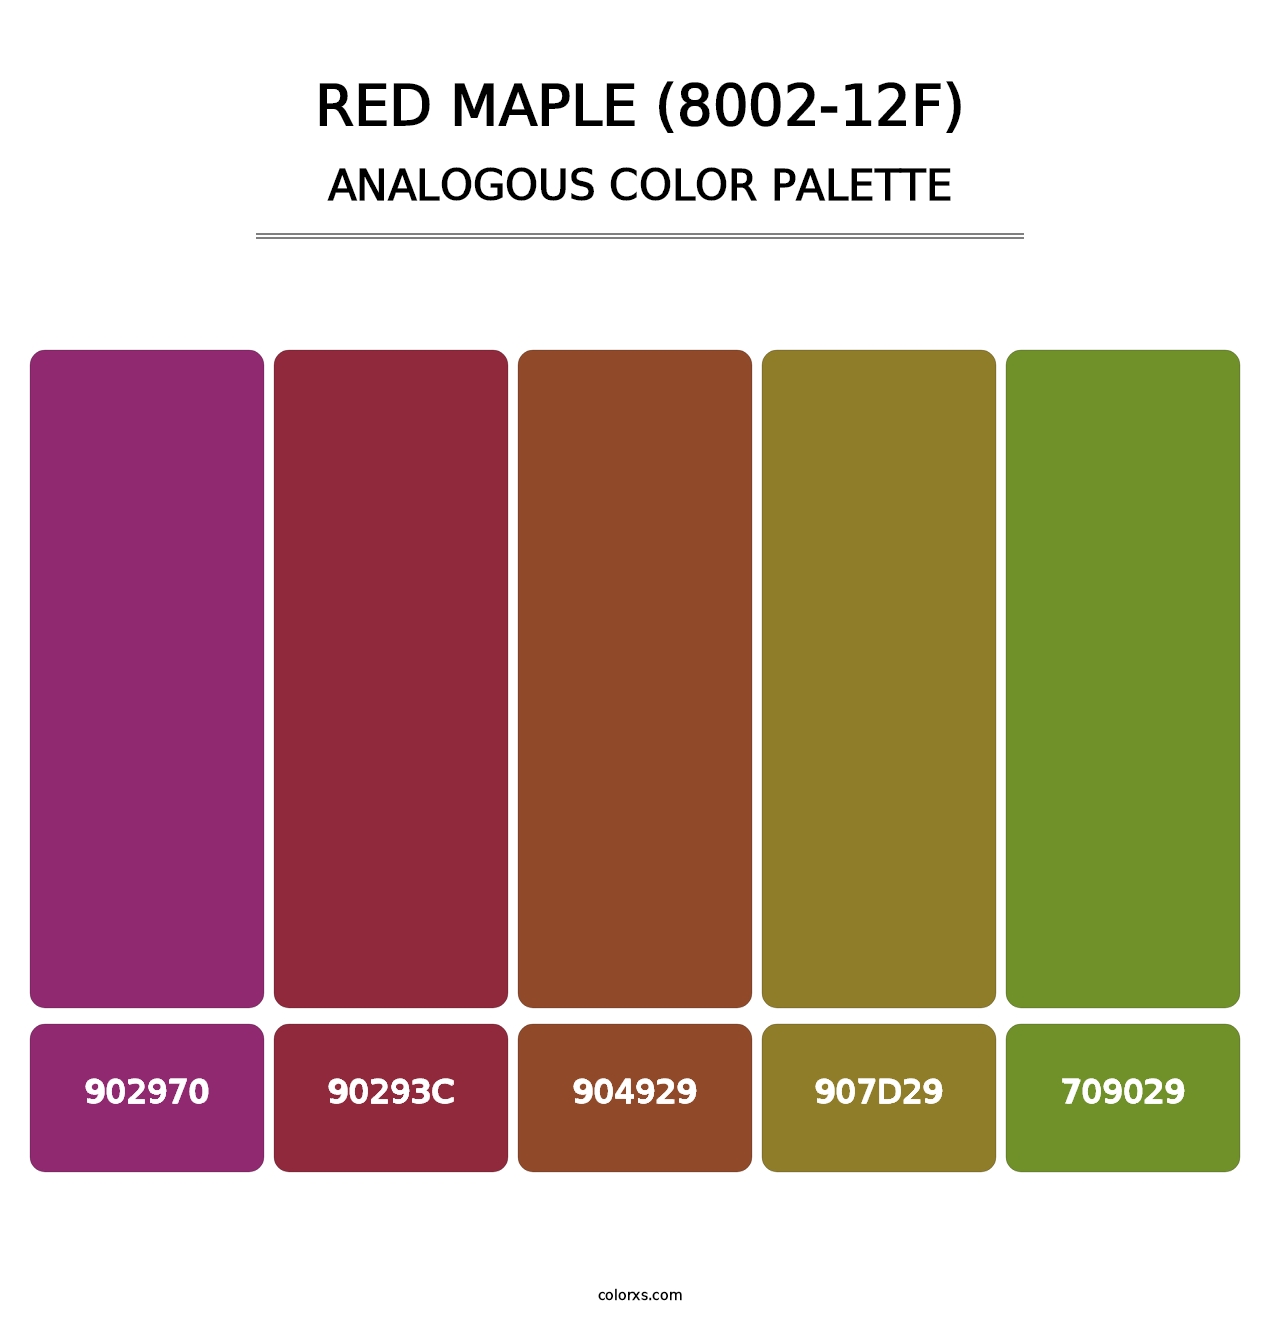 Red Maple (8002-12F) - Analogous Color Palette